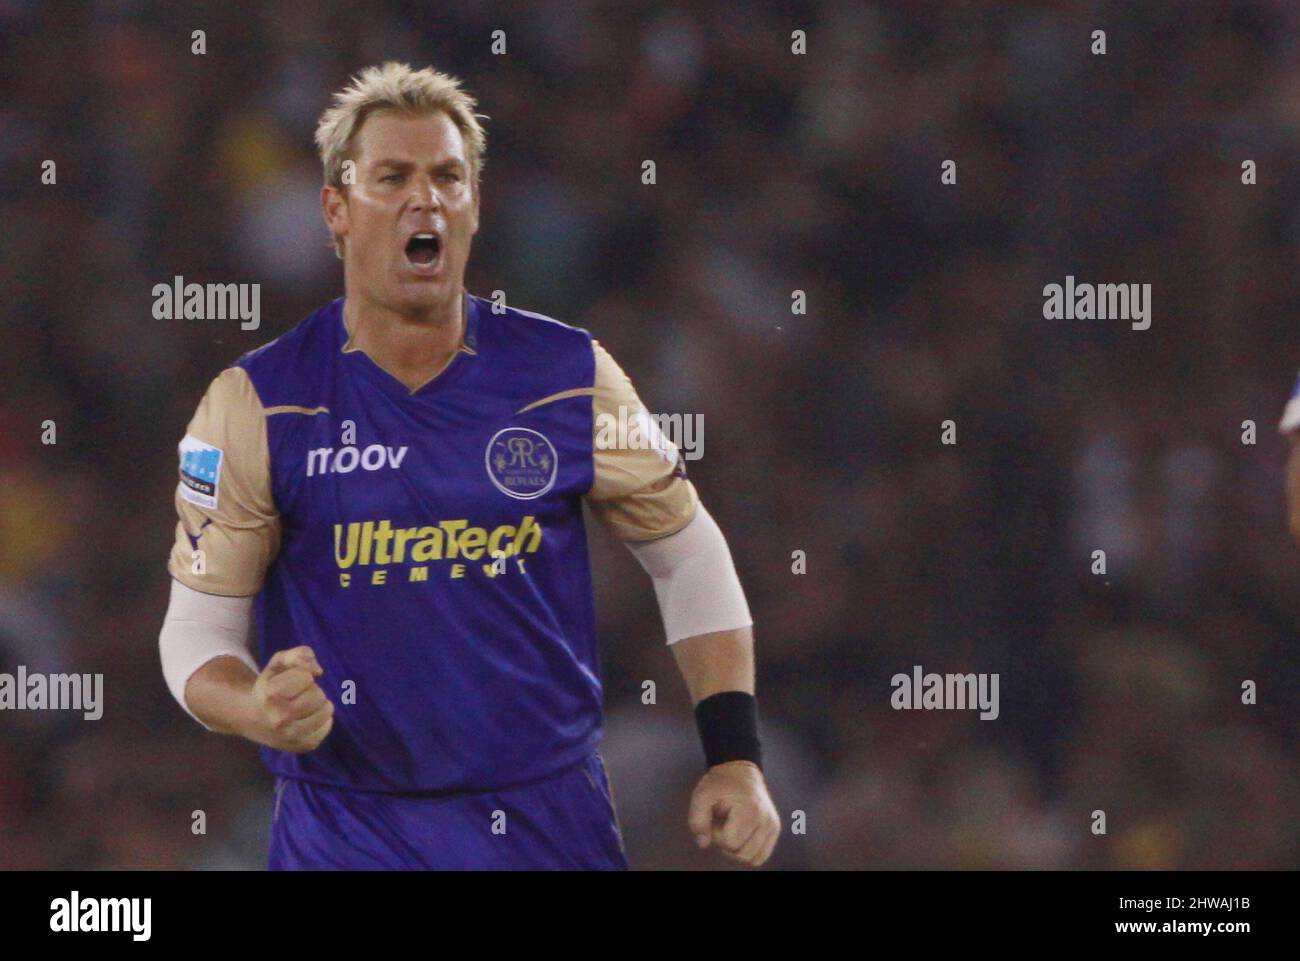 Rajasthan Royals player Shane Warne celebrates after taking wicket of Kings XI Punjab player Manvinder Bisla at the Indian Premier League 3Twenty20 cricket competition at the Punjab Cricket Association Stadium in Mohali India, on Wednesday, March 24, 2010. Stock Photo